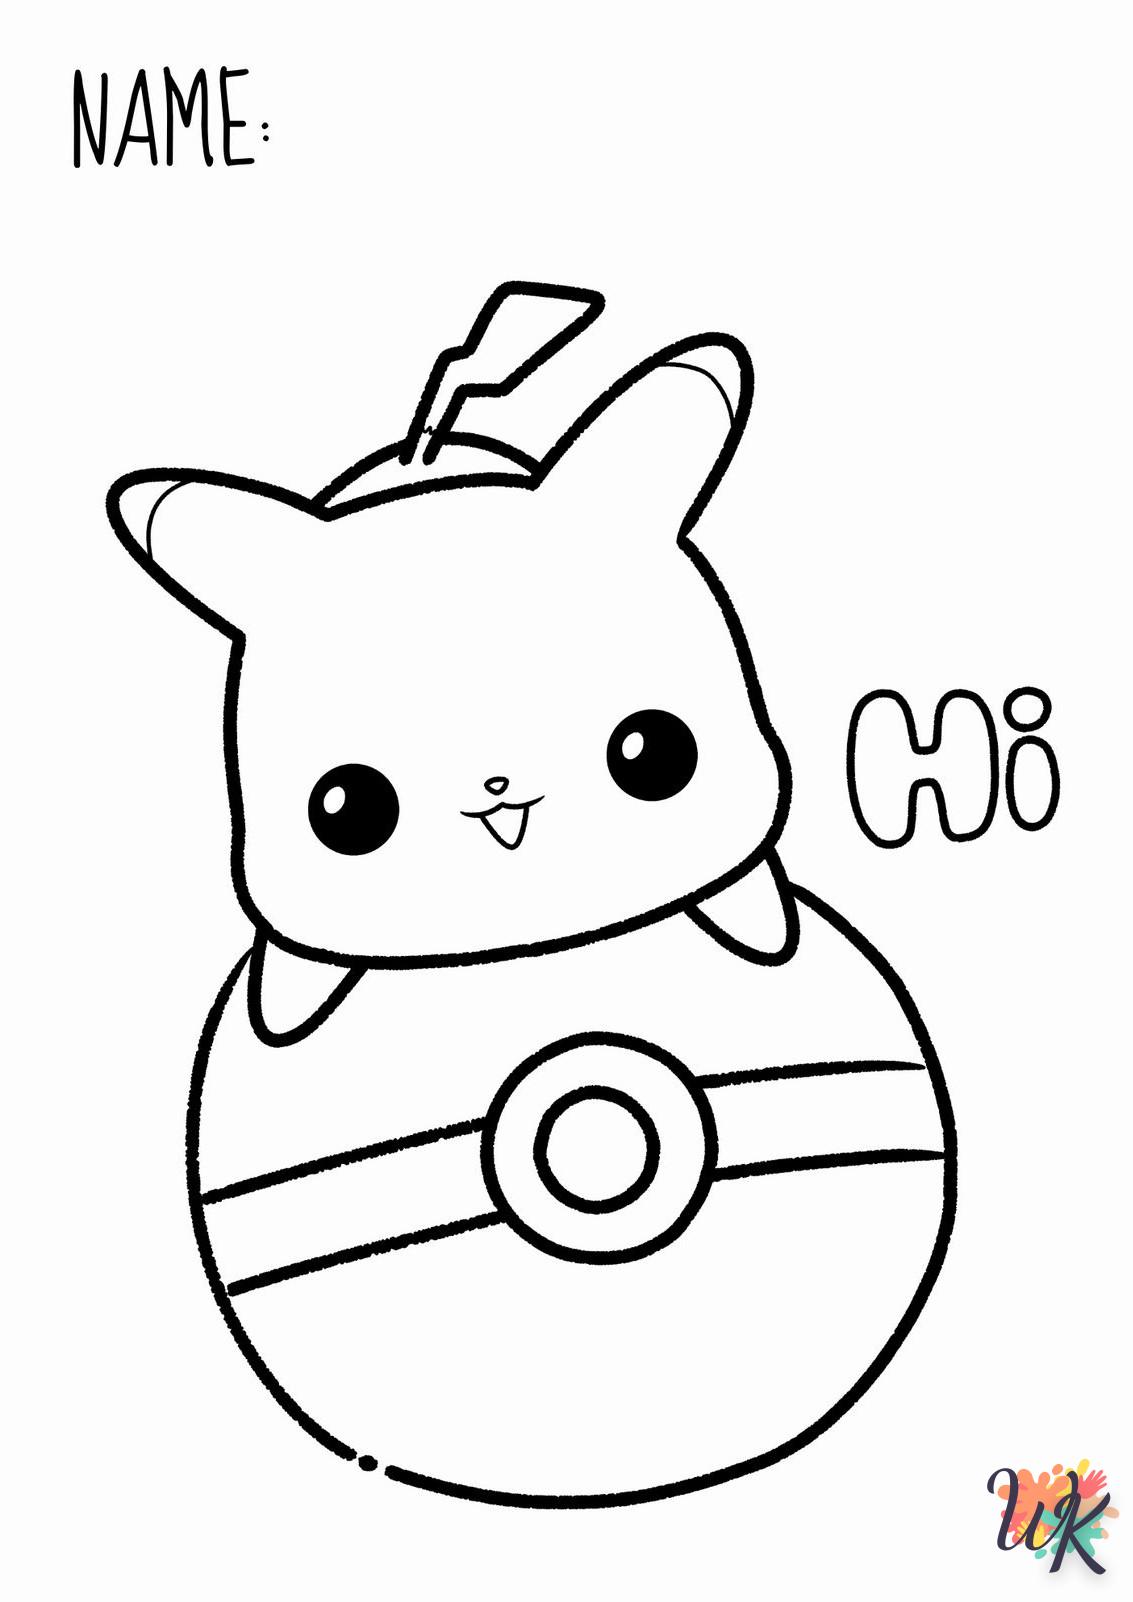 Pikachu adult coloring pages